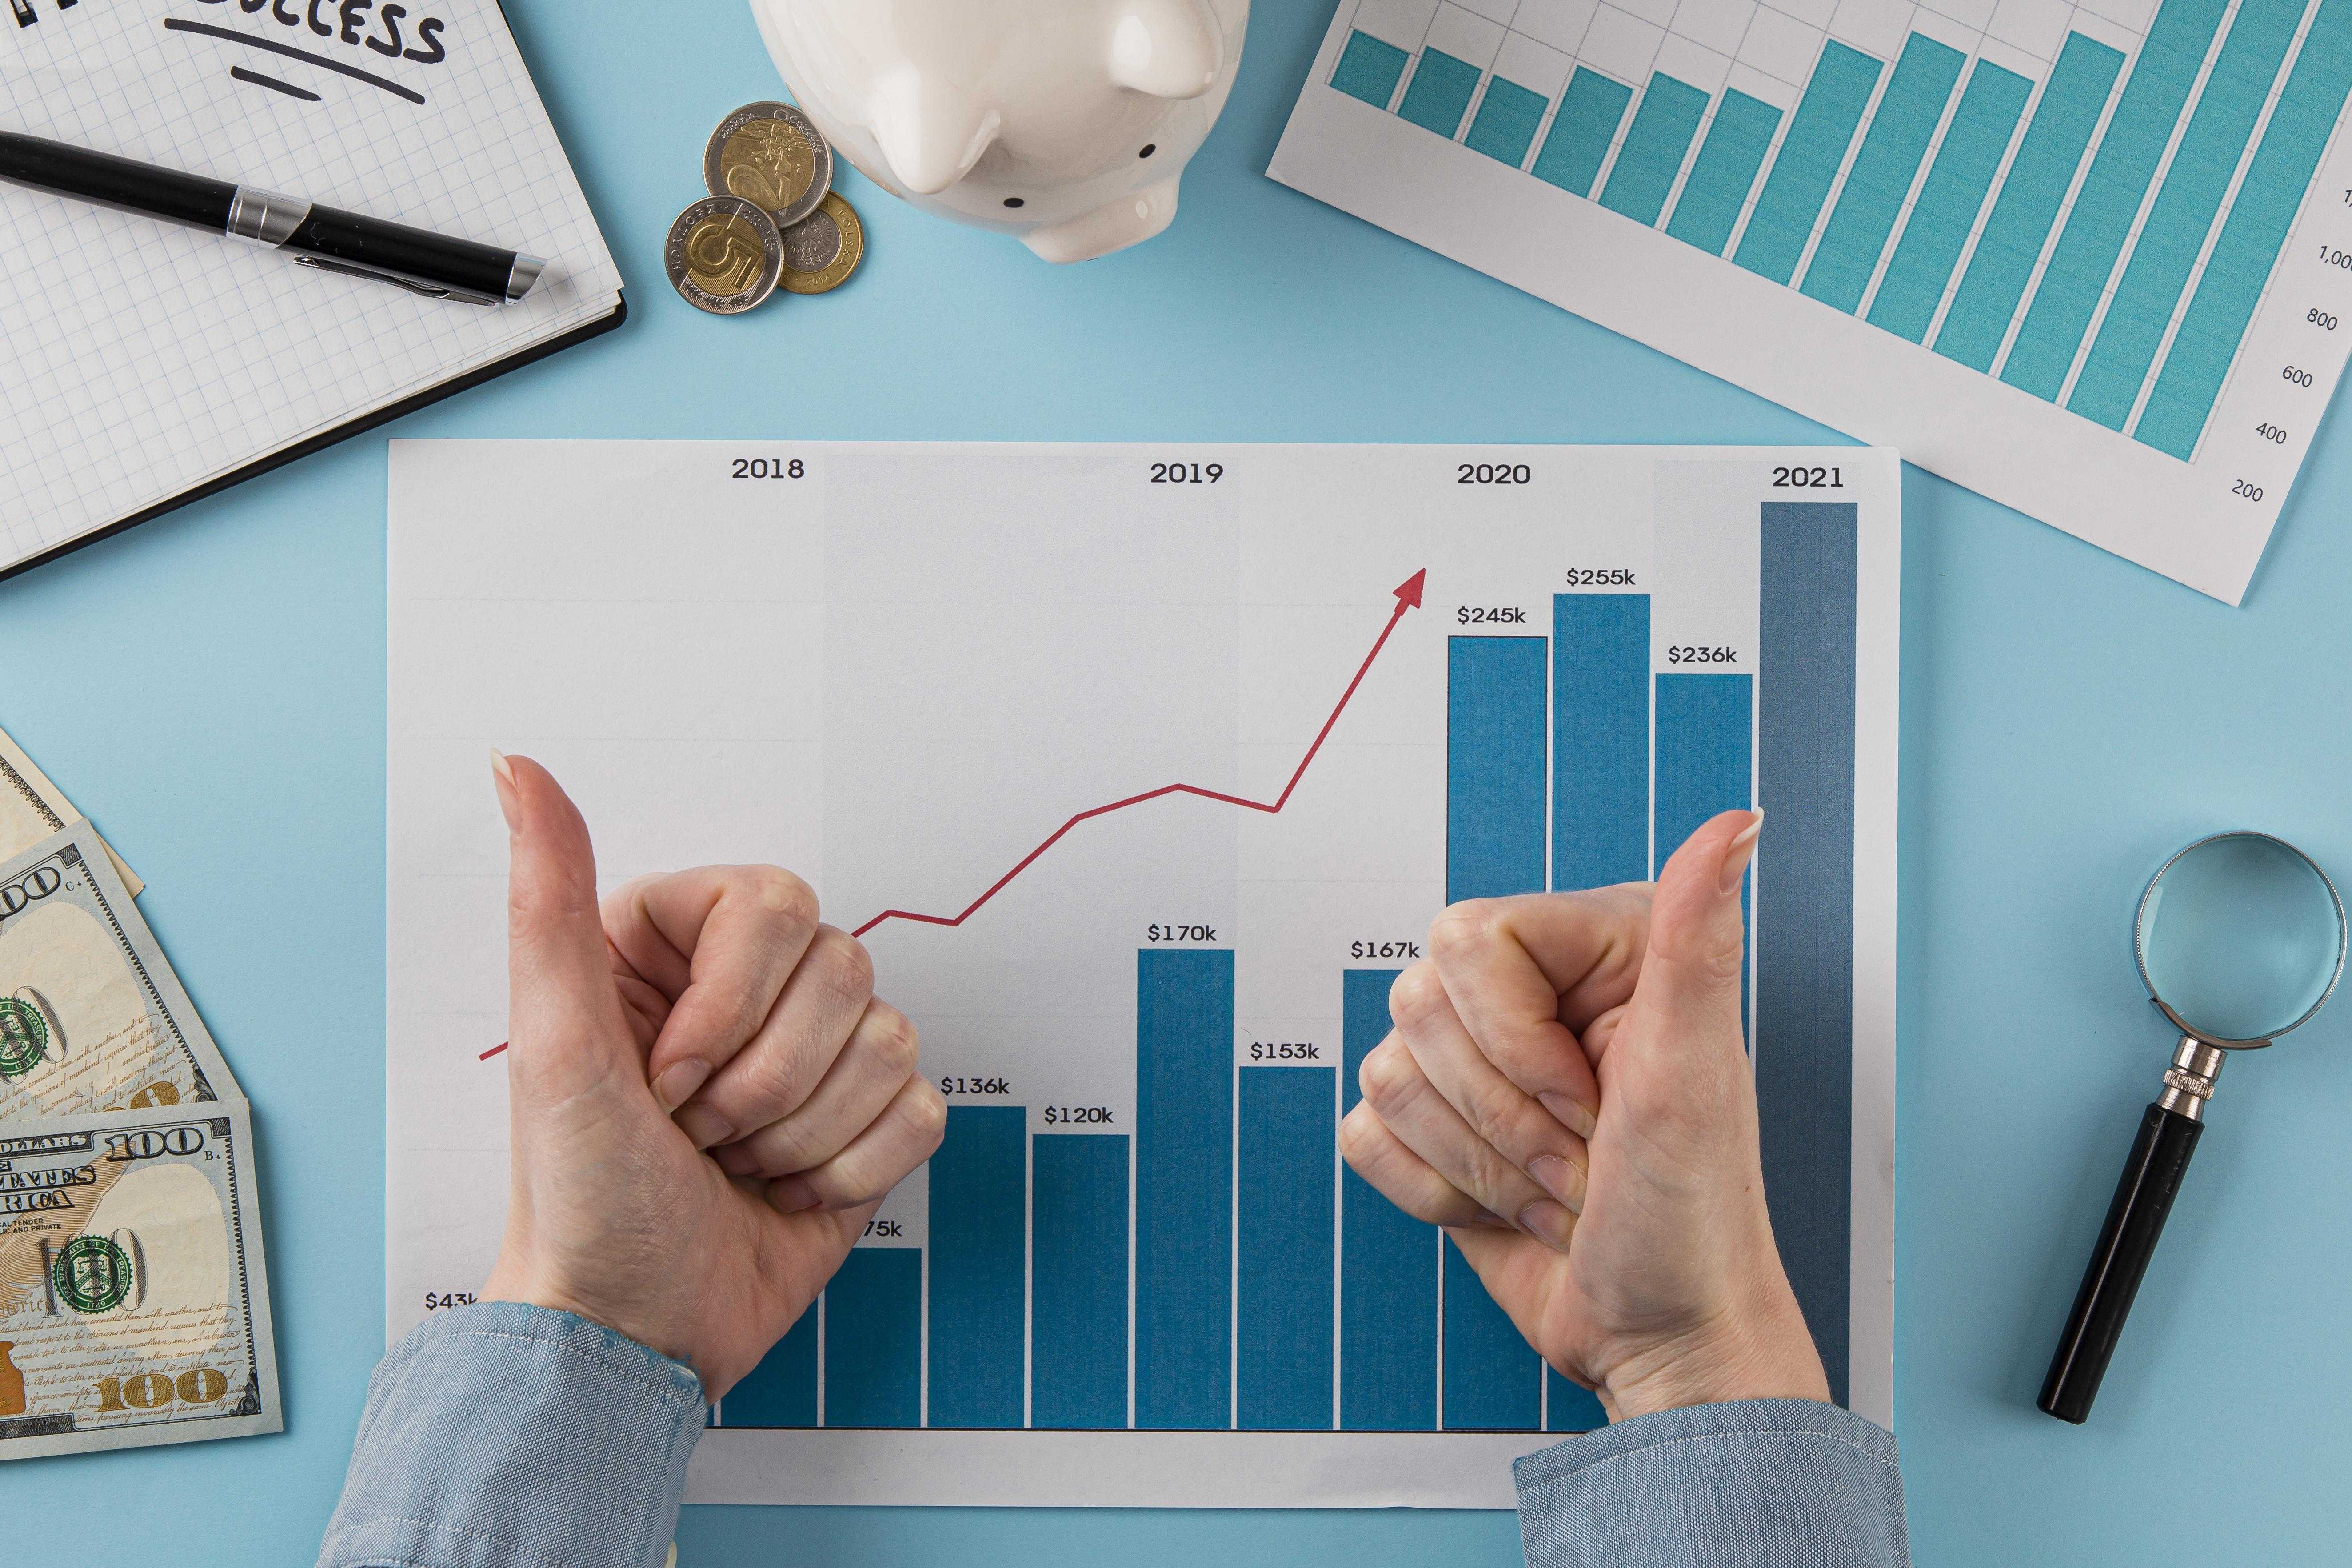 top-view-business-items-with-growth-chart-hands-giving-thumbs-up.jpg